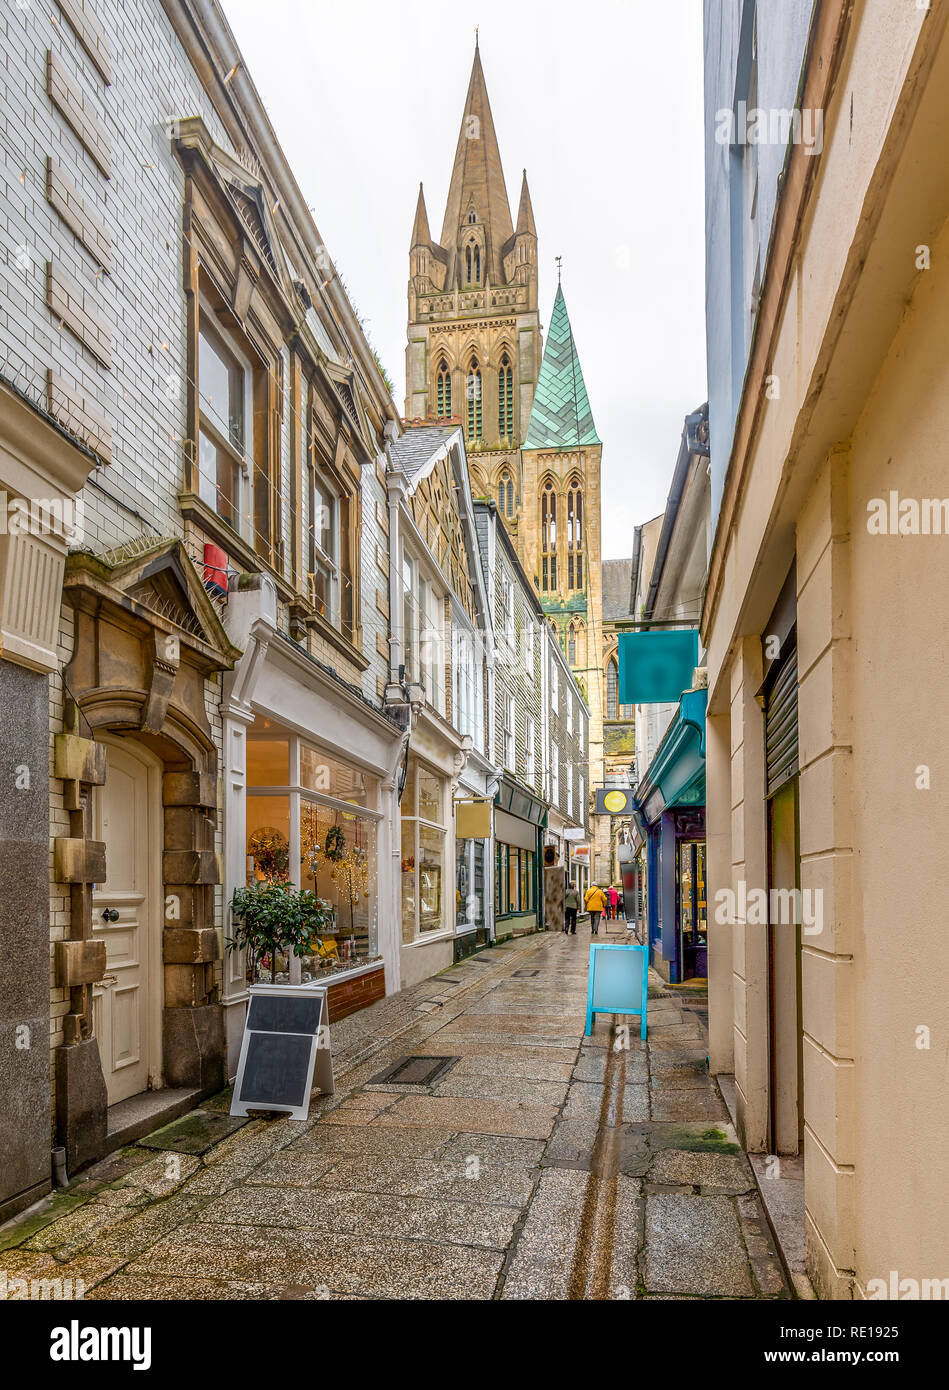 Shops in Cathedral Lane, Truro in Cornwall, with views of the Cathedral spires Stock Photo